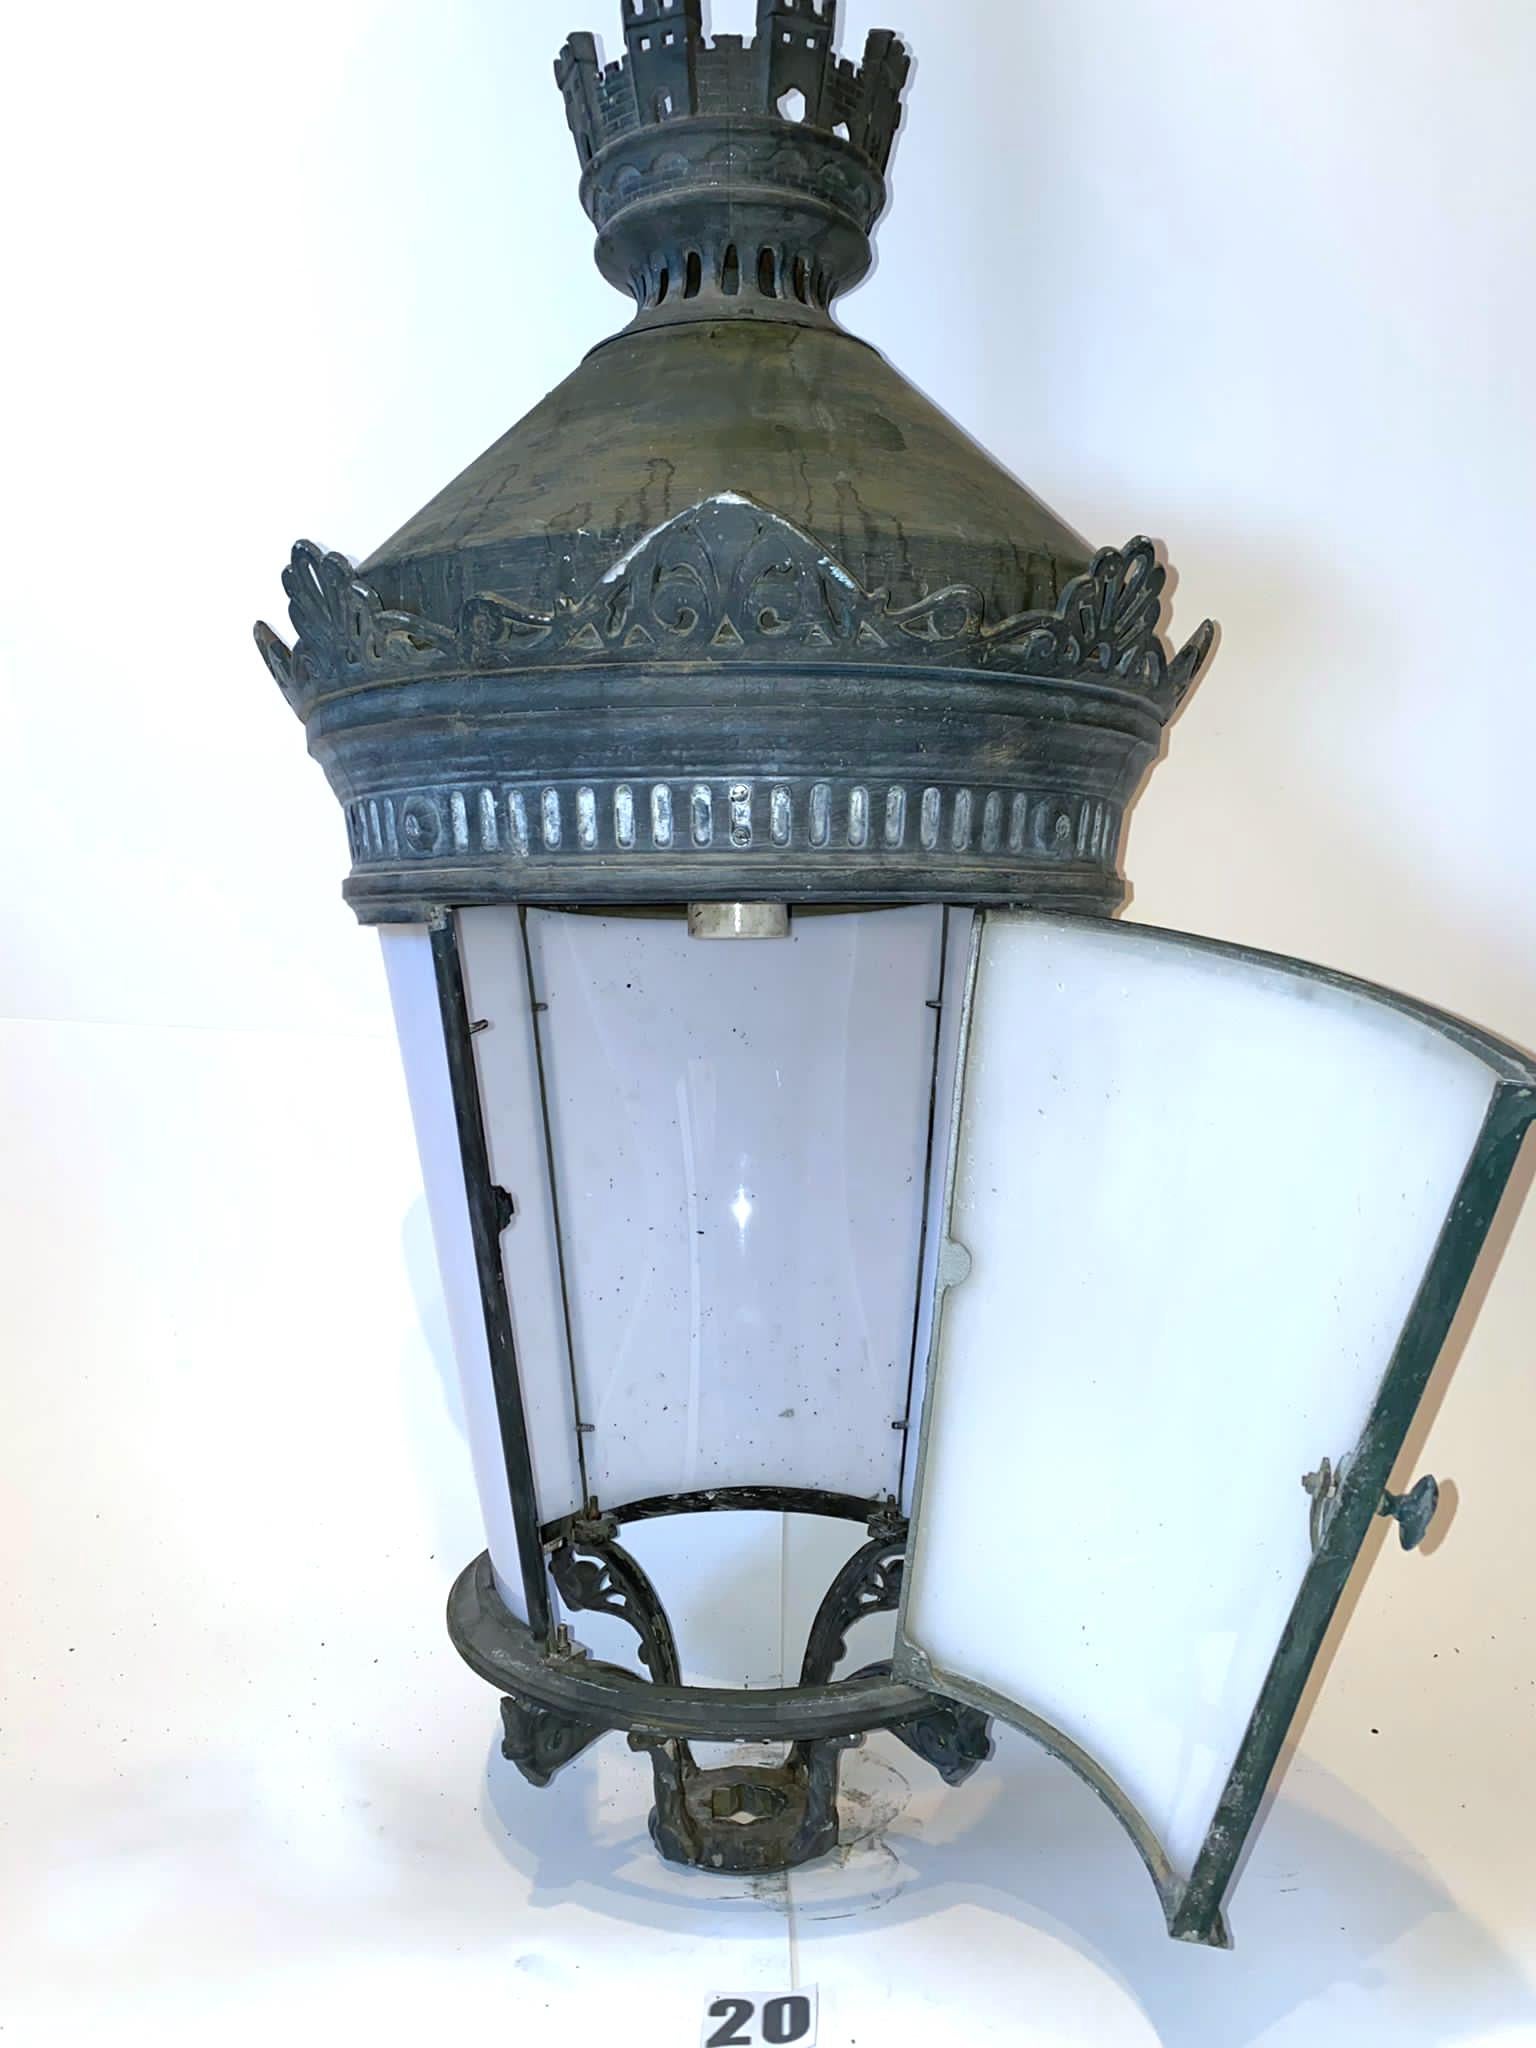 I'm offering a total of 29 Palatial Lanterns on my 1st Dibs store. 
 
****The Lantern pictured in this listing is LANTERN #20, and my restorer chose it as a PAIR with LANTERN #19 (listed separately). 
This lantern, LANTERN #20, can be purchased